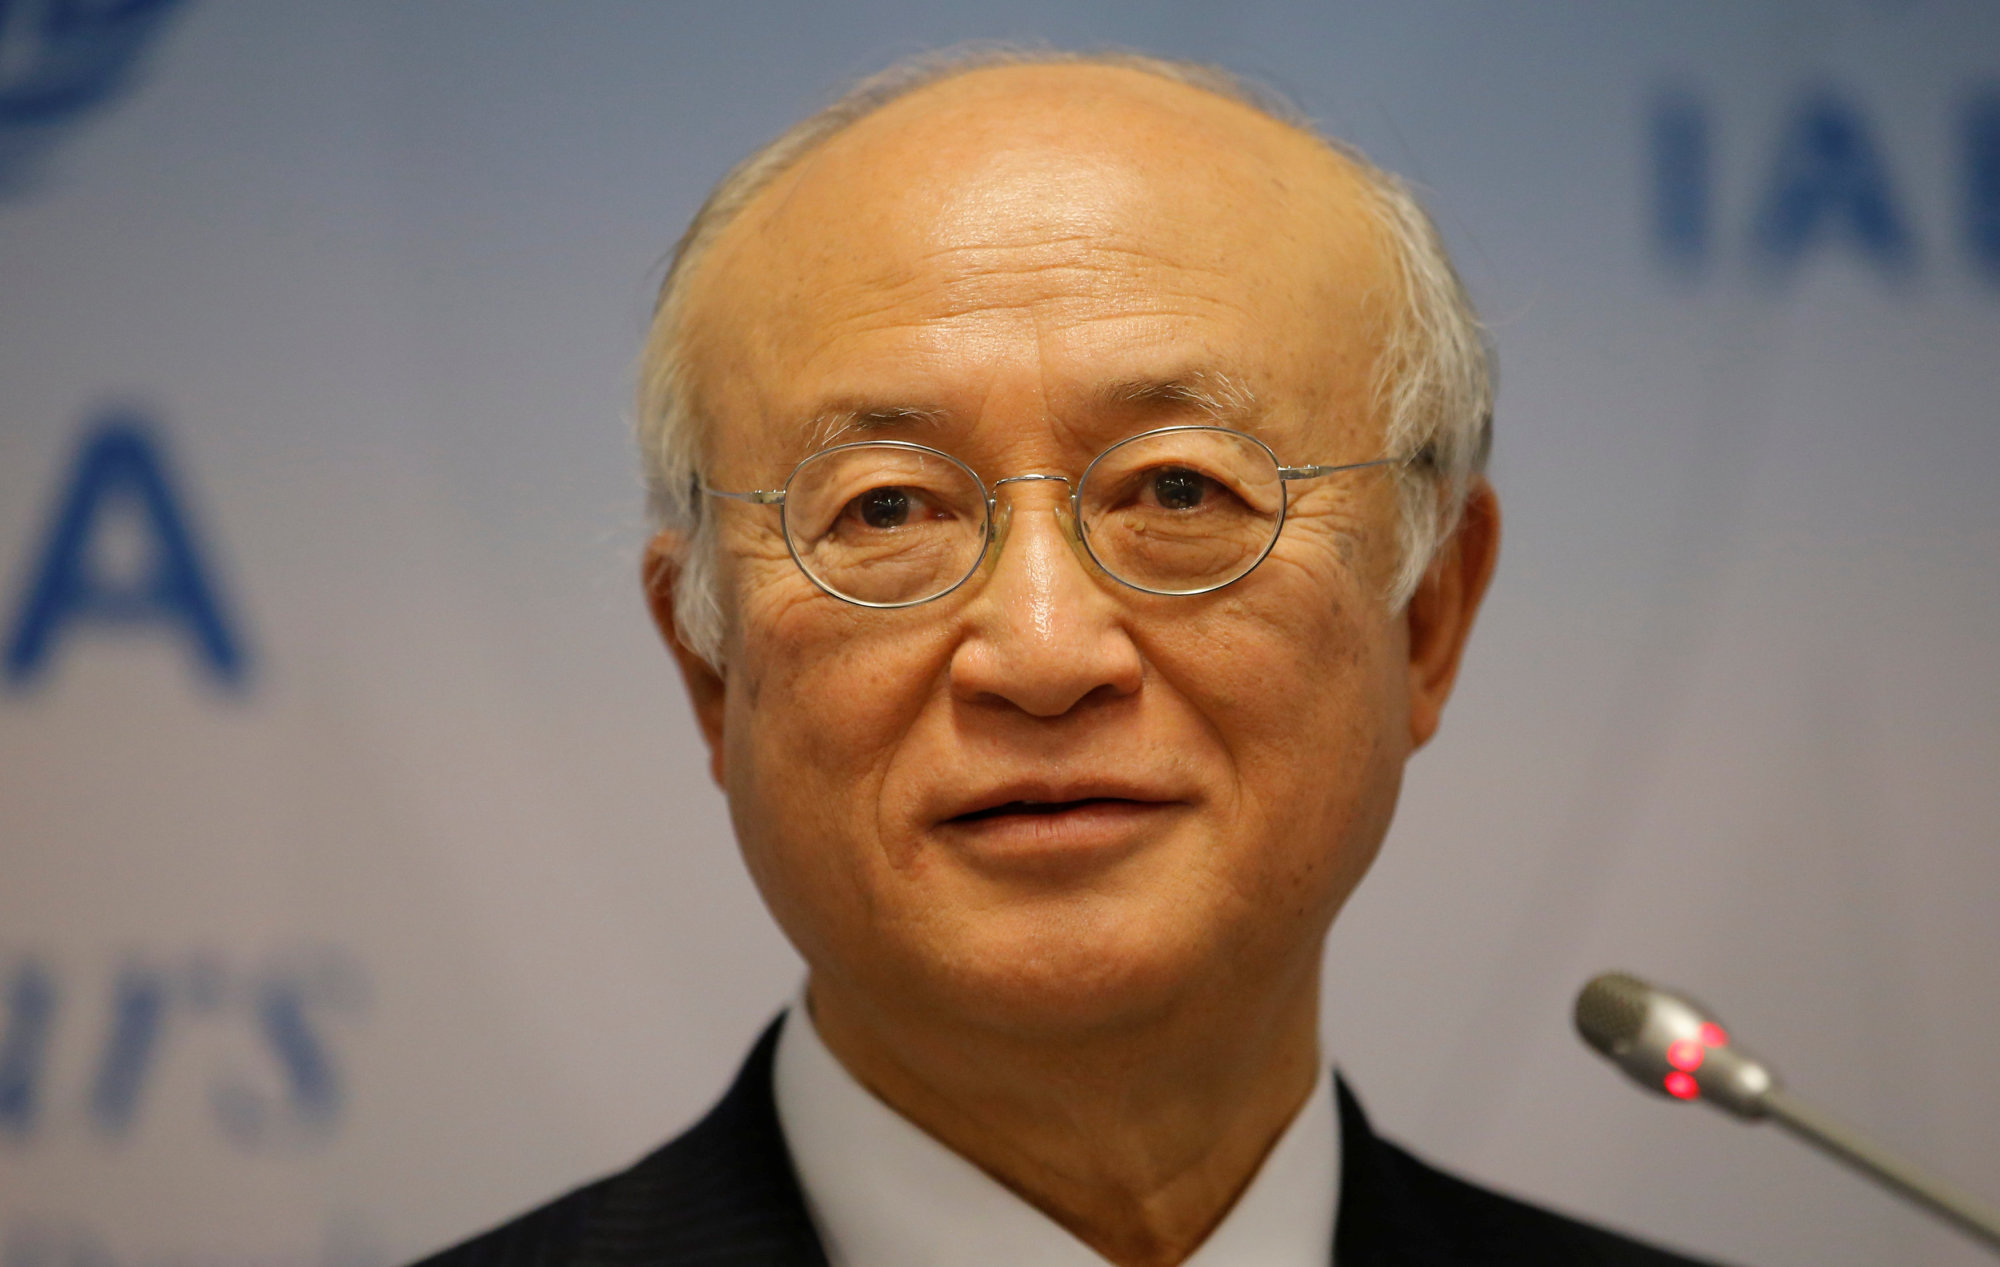 International Atomic Energy Agency (IAEA) Director General Yukiya Amano addresses a news conference after a board of governors meeting at the IAEA headquarters in Vienna Monday. | REUTERS